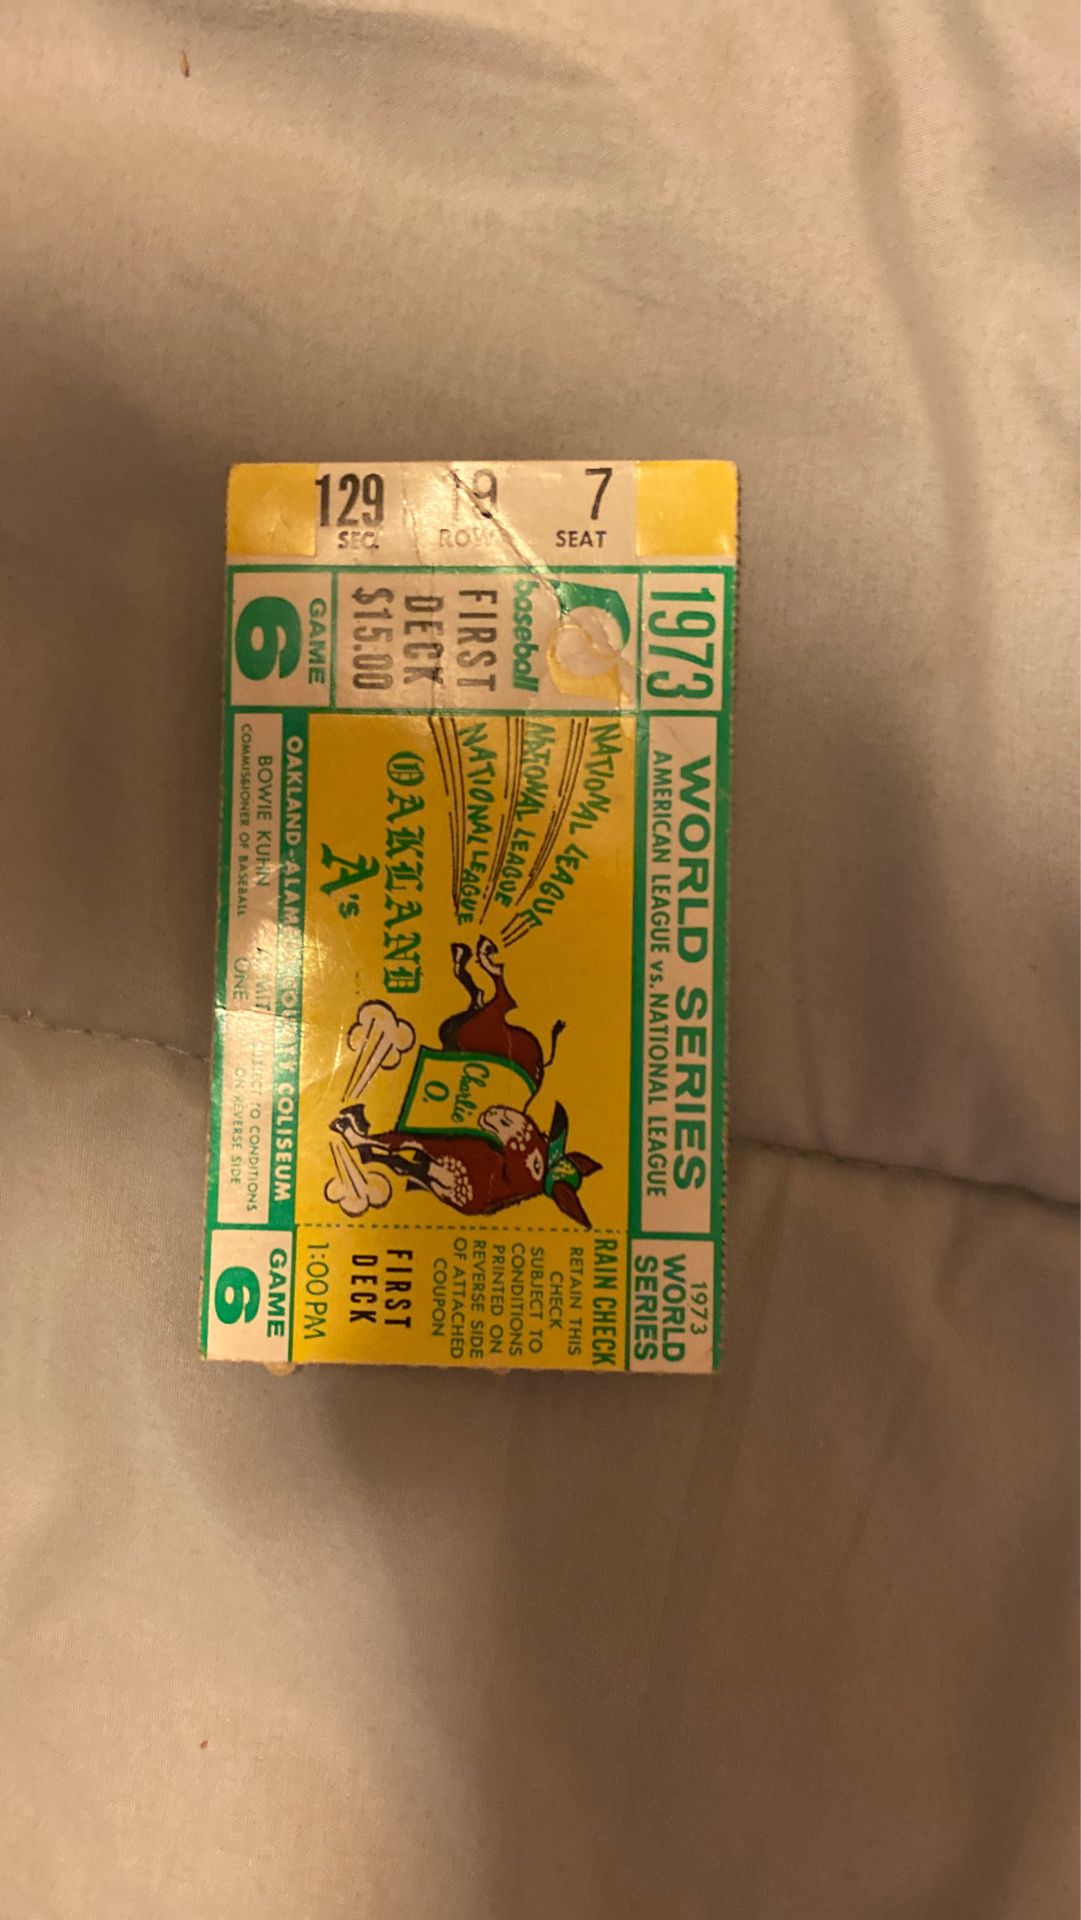 Oakland A’s ticket stub from 1973 World Series Game 6